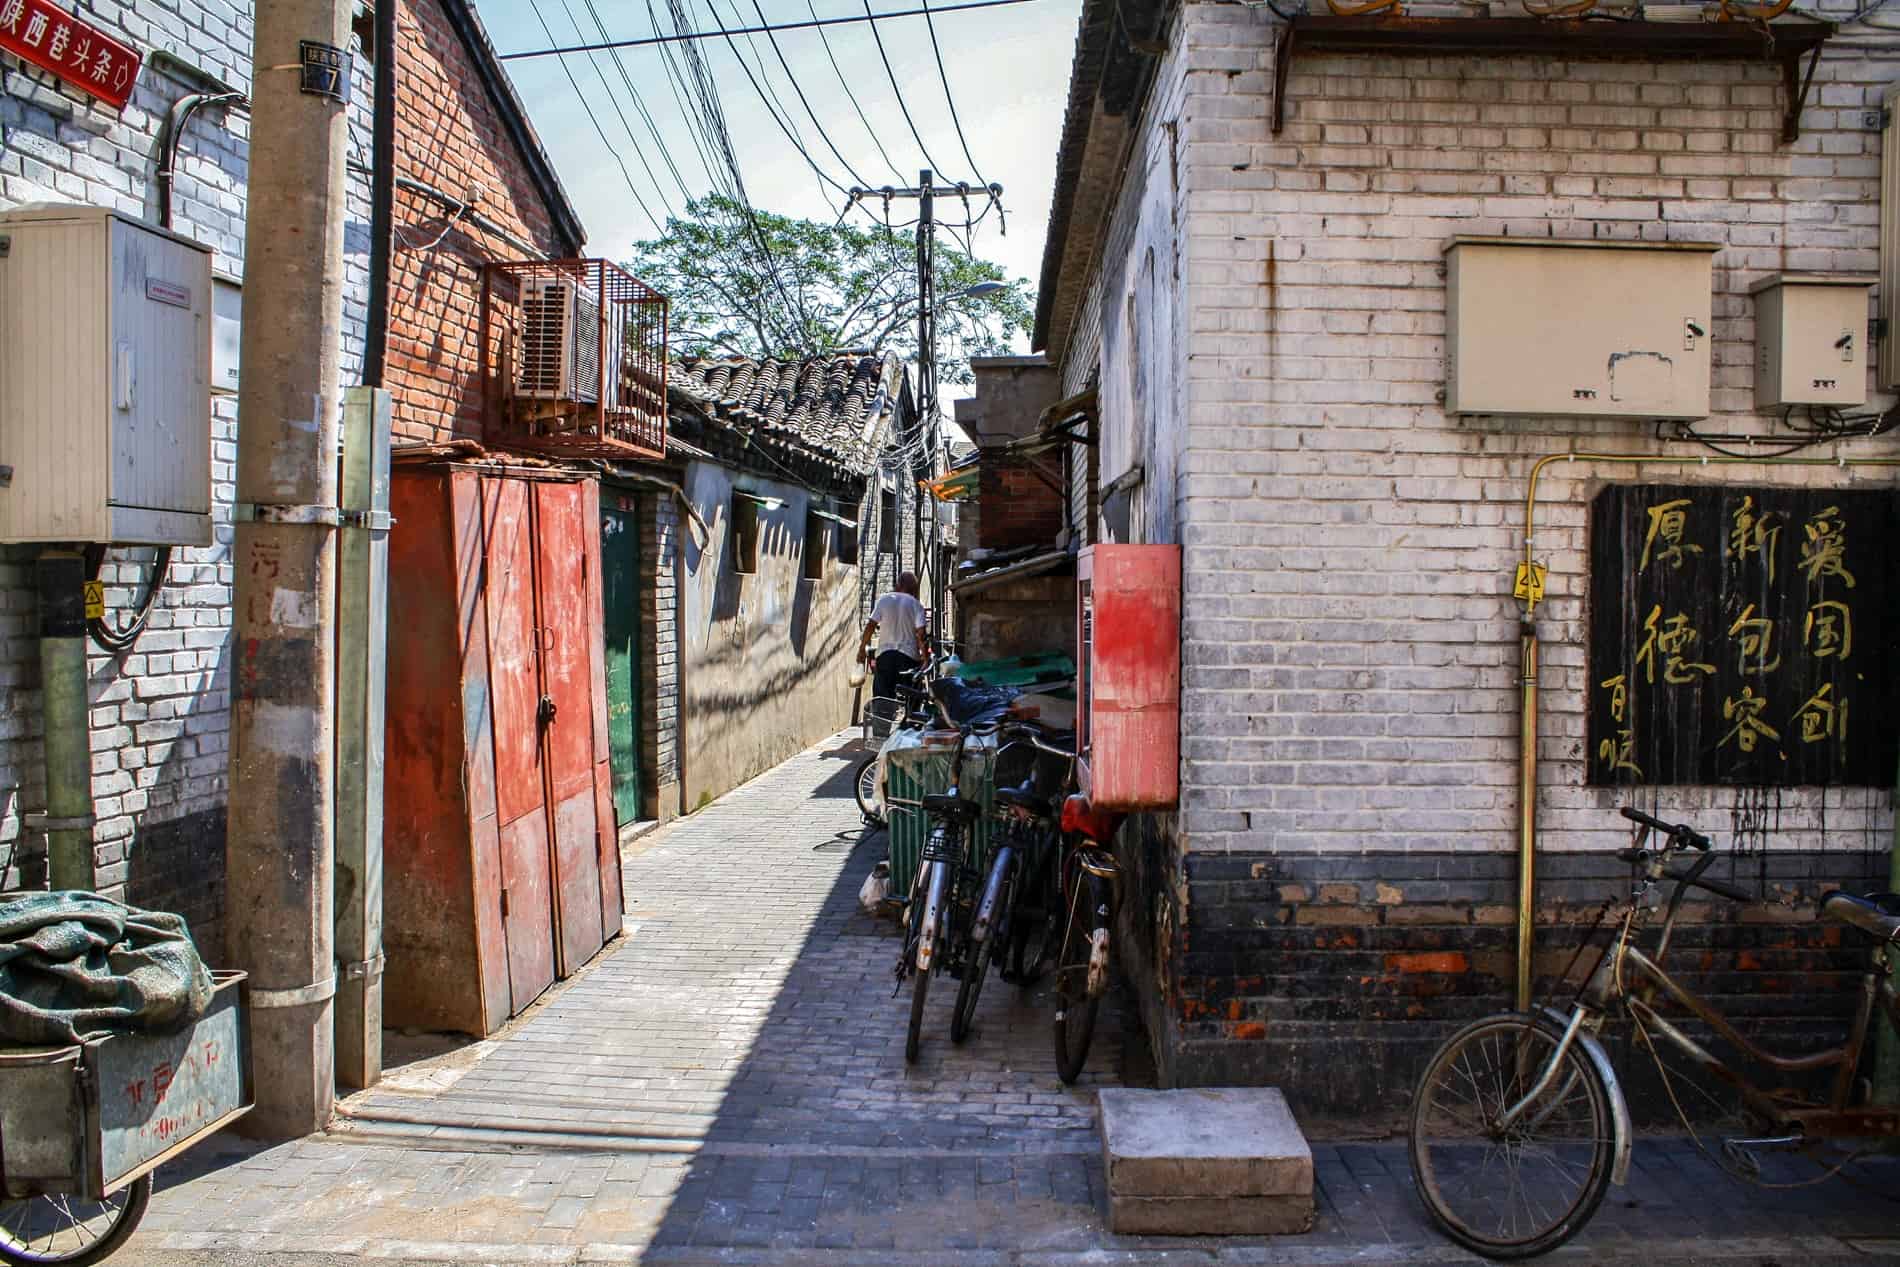 A man walking down a street in a Beijing hutong lined with brick buildings and bikes. 